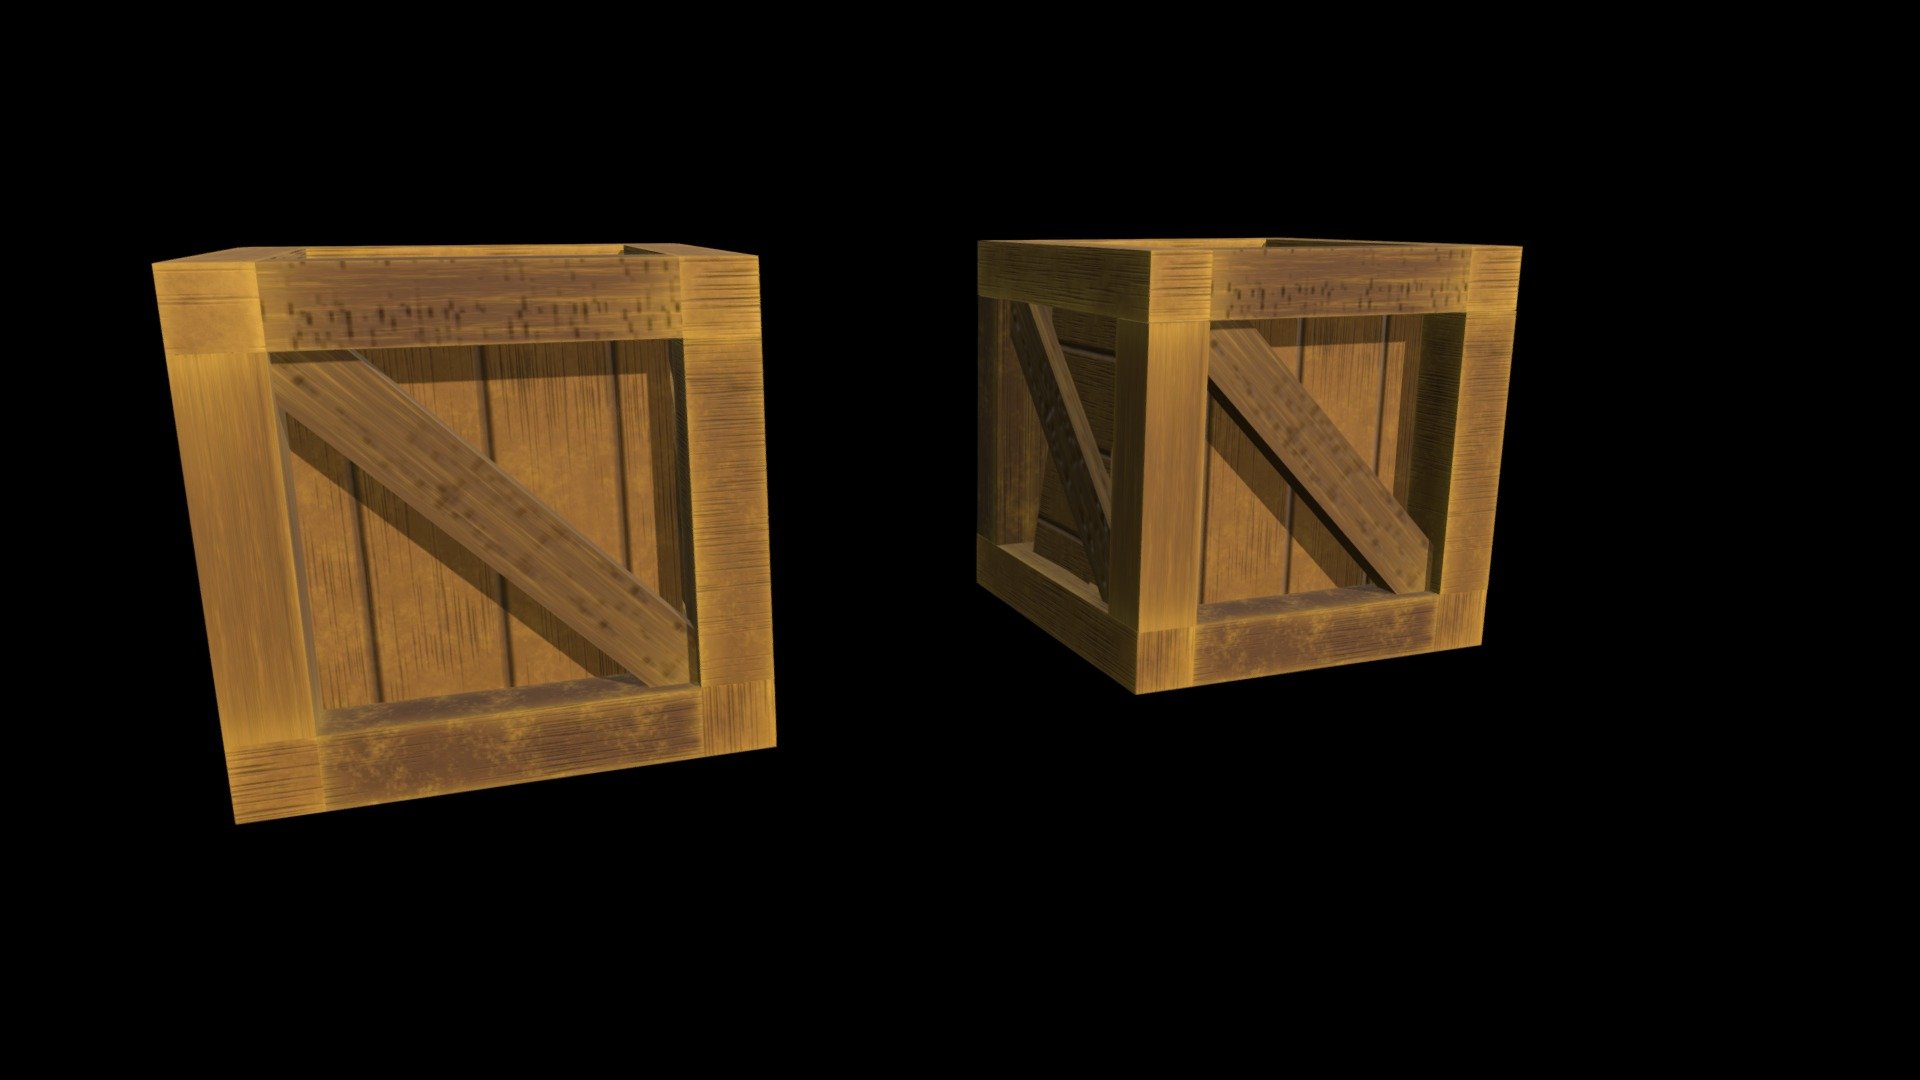 Wood box with shatter animation
2 models
 - 1 static
 - 1 animated

*(In the animated model all parts are separeted objects)

Animated in blender using rigid body simulation

Textured in substance painter and PS - Wood Box Shatter Animation - Buy Royalty Free 3D model by psicodelik 3d model